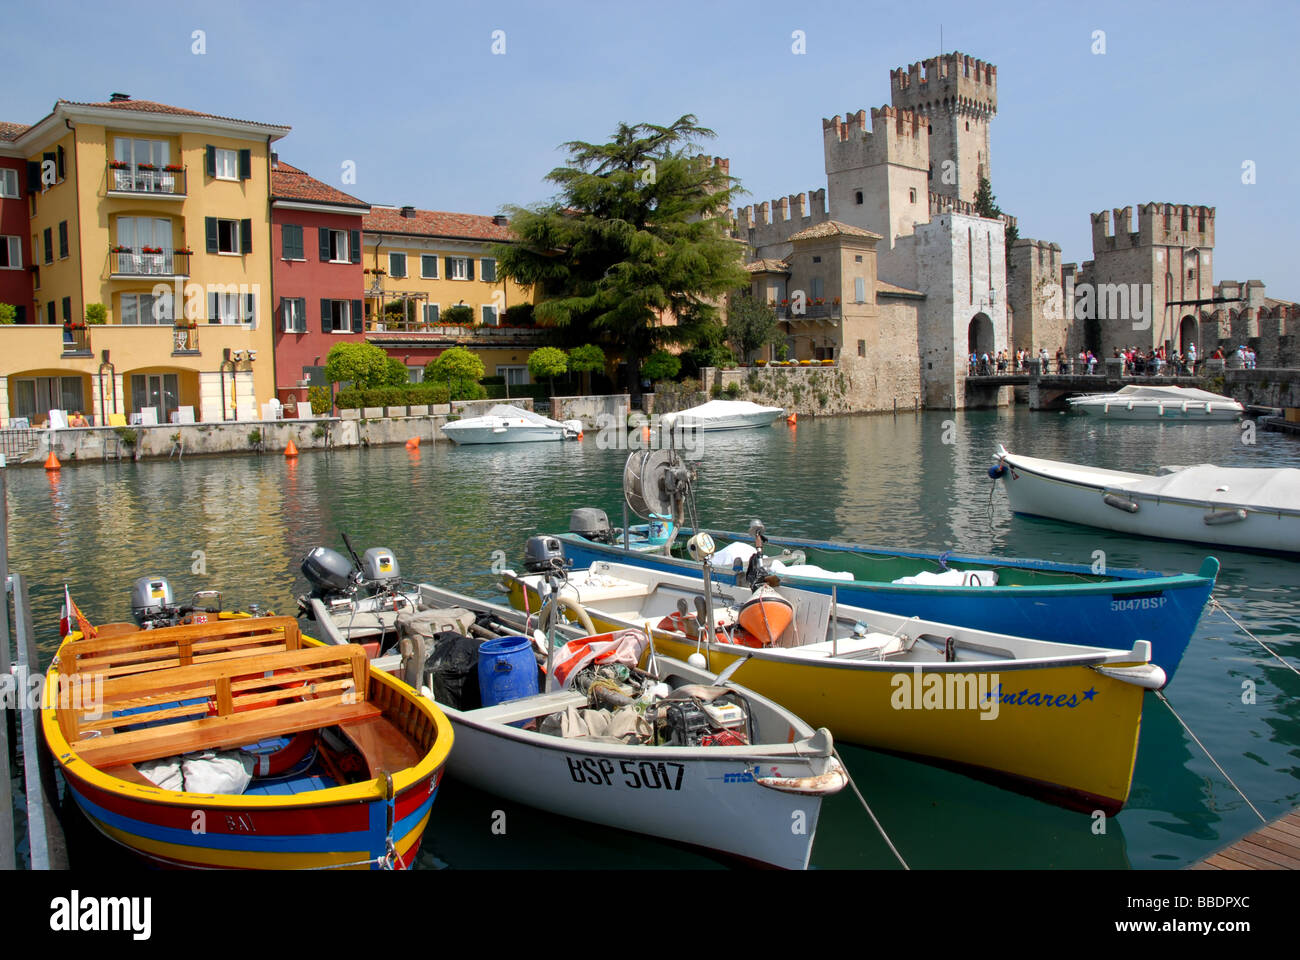 Sirmione harbour and castle, Lake Garda, Italy Stock Photo